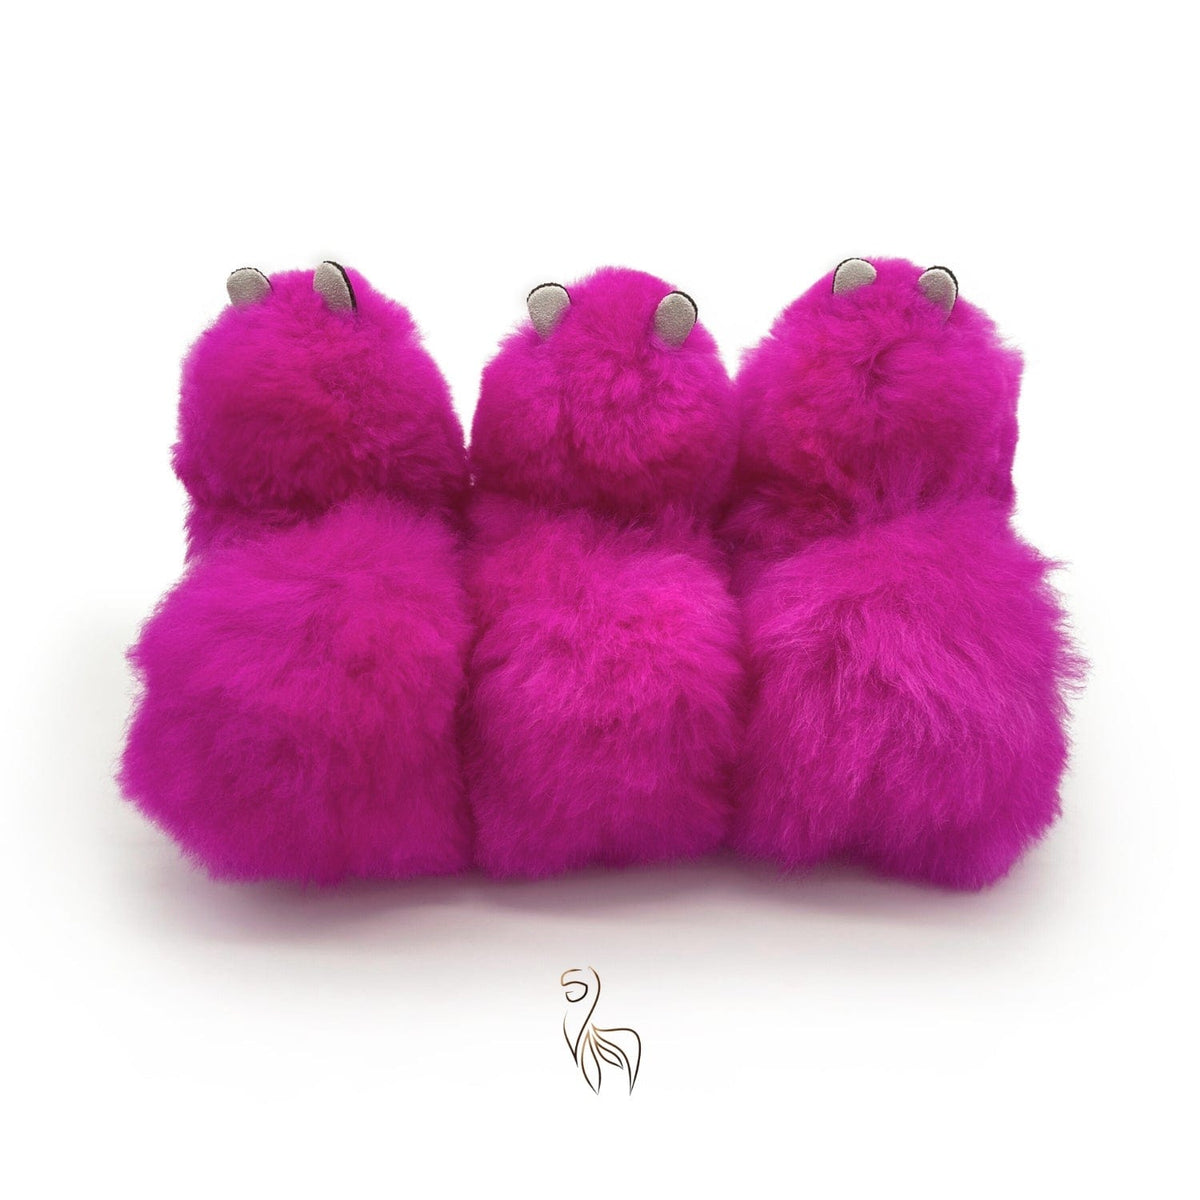 Pixie Dust - Small Alpaca Toy (23cm) - Limited Edition